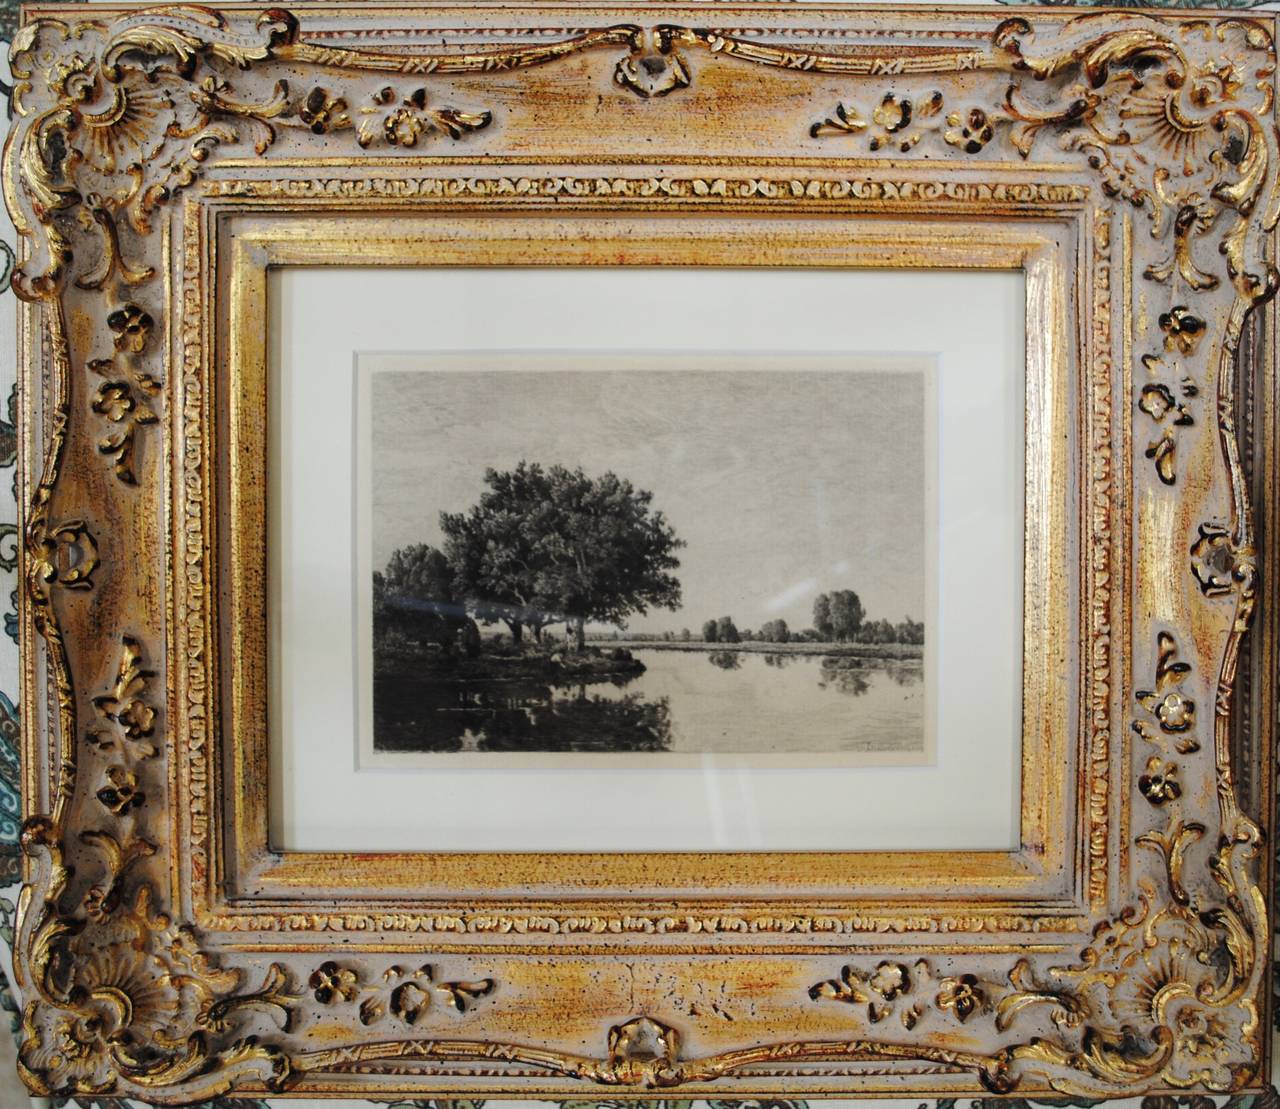 The Pond Side - Print by Théodore Rousseau